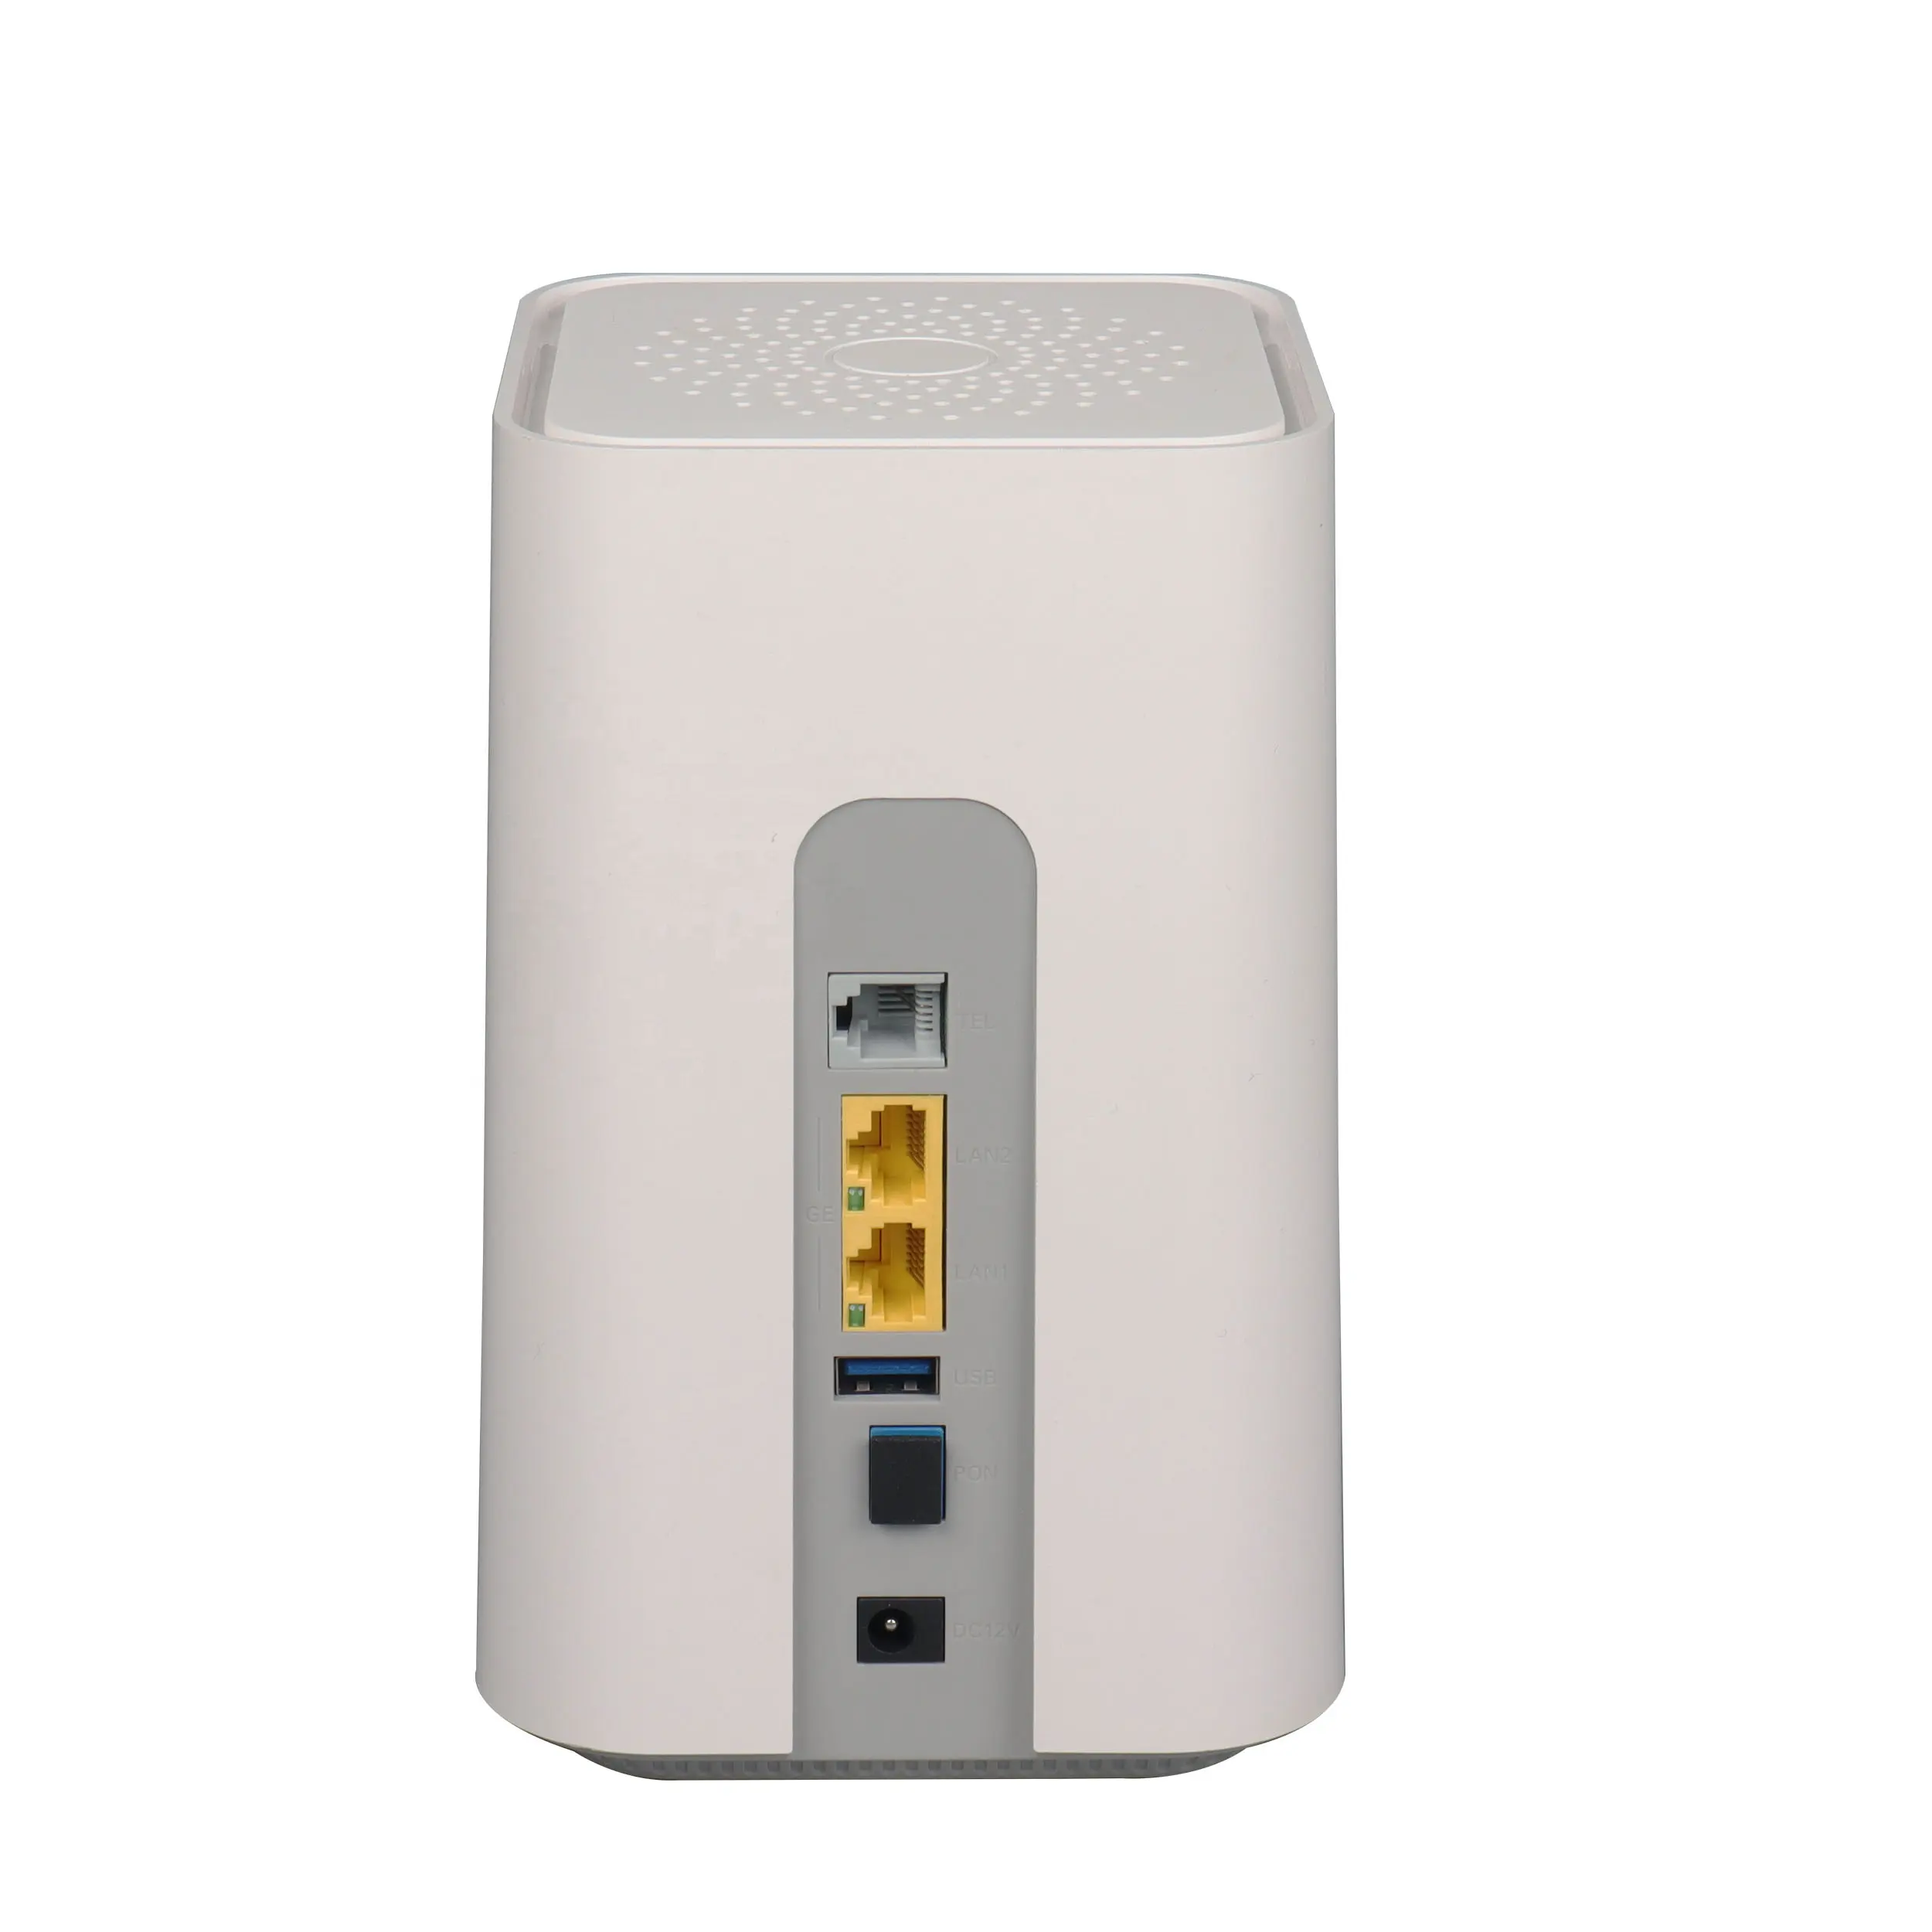 Router wifi jala, router jala 2GE + 1 Voip + 1USB + 2.4/5G wifi FTTX